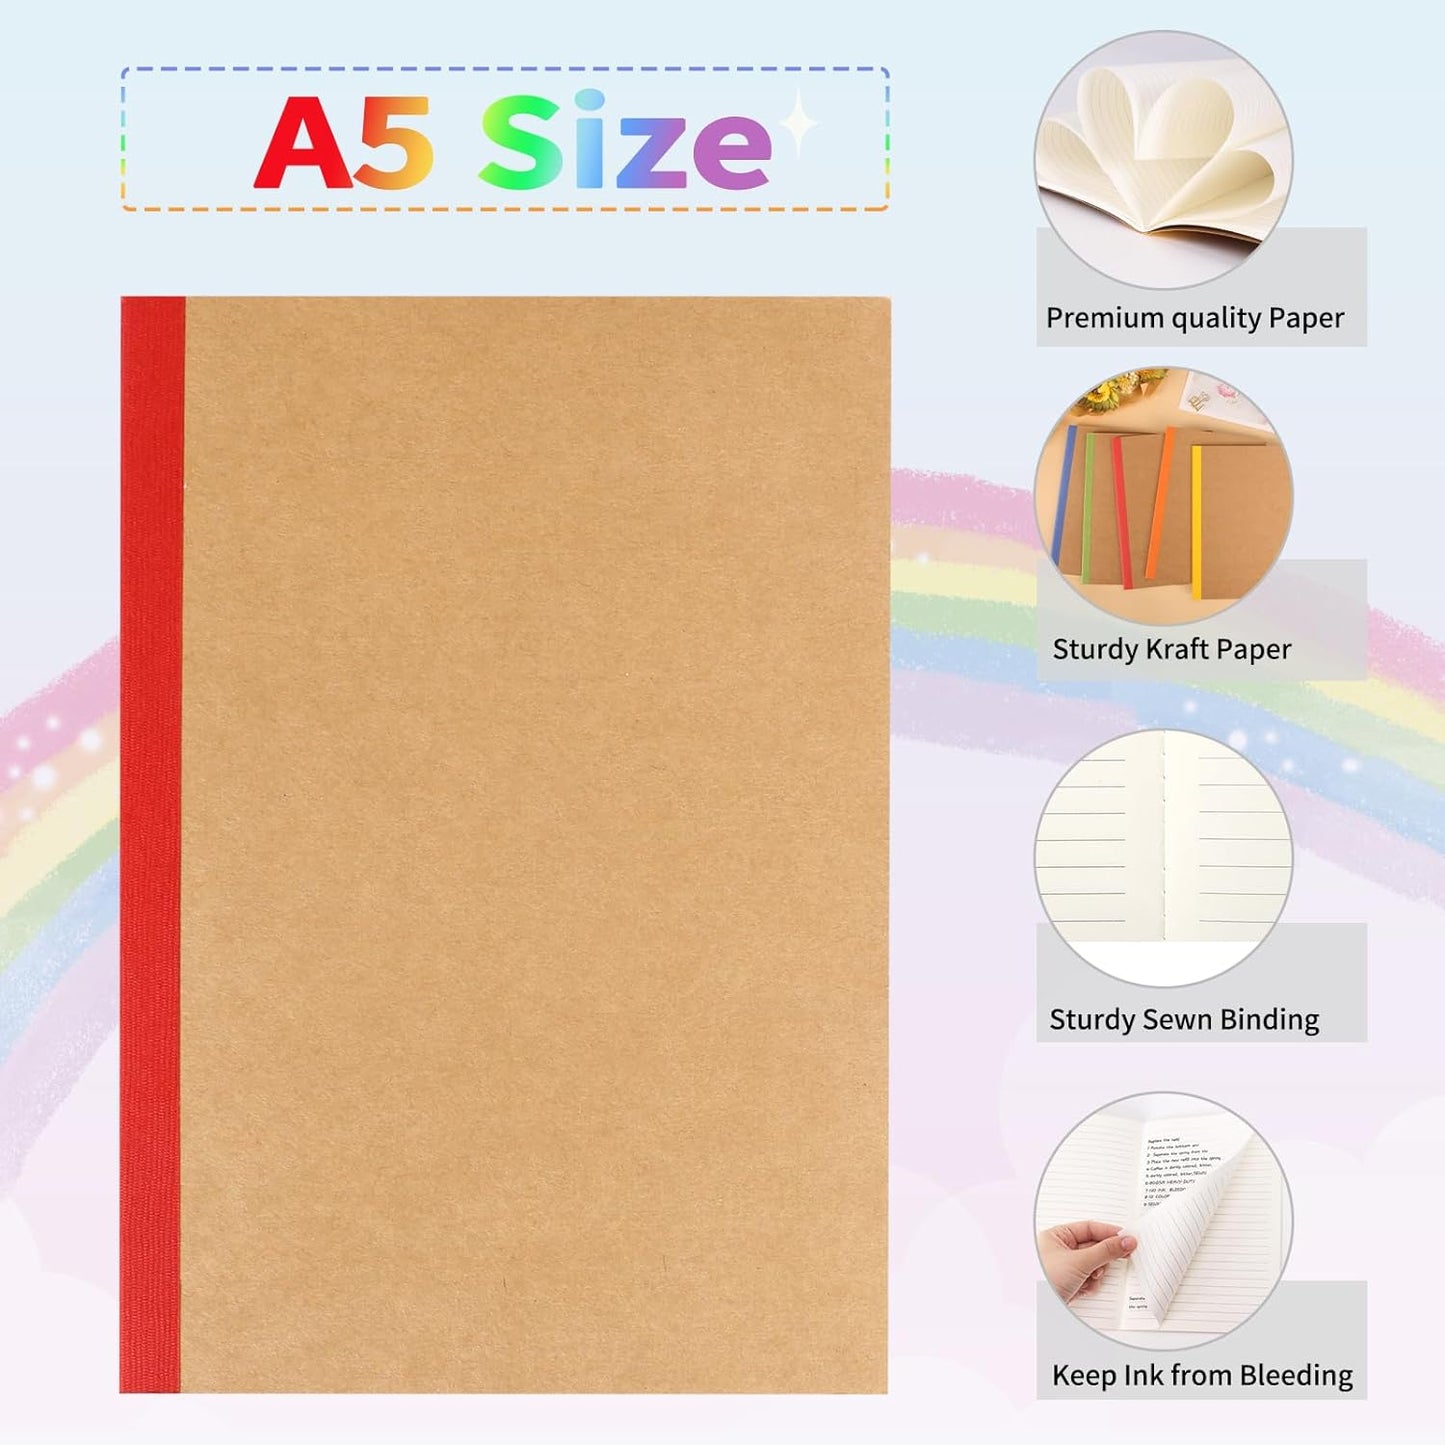 60 Pack A5 Kraft Notebooks, Composition Notebooks Lined Journal Bulk, 15 Colors with Rainbow Spines, 60 Pages for Kids Women Girls, School Office Supplies